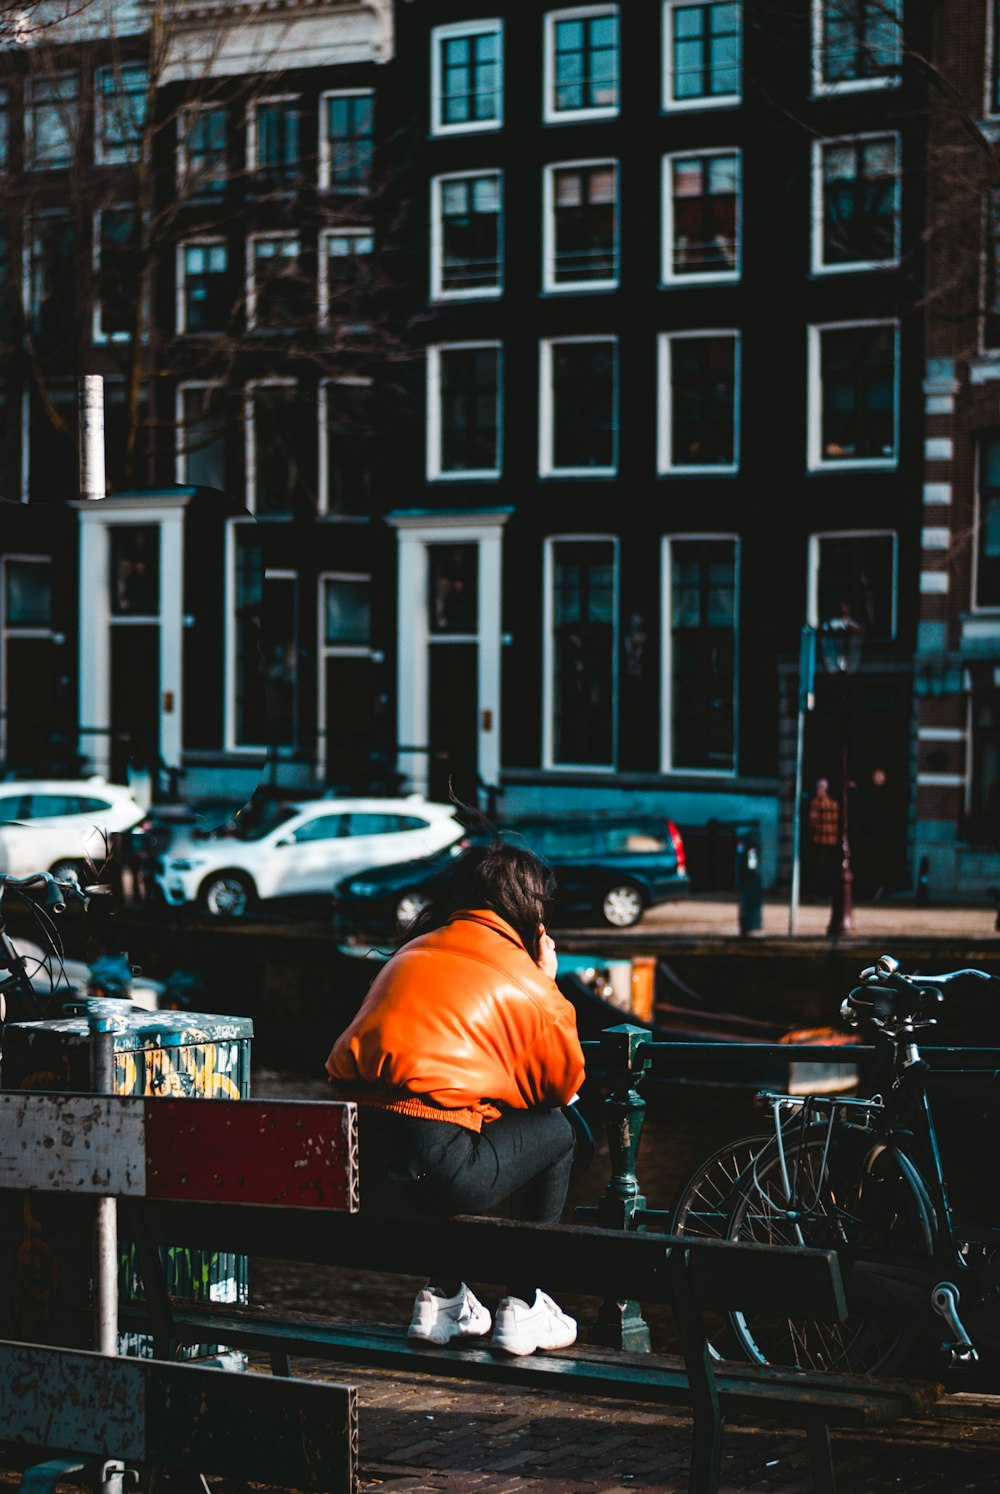 man in orange shirt sitting on bench in front of parked bicycle during daytime